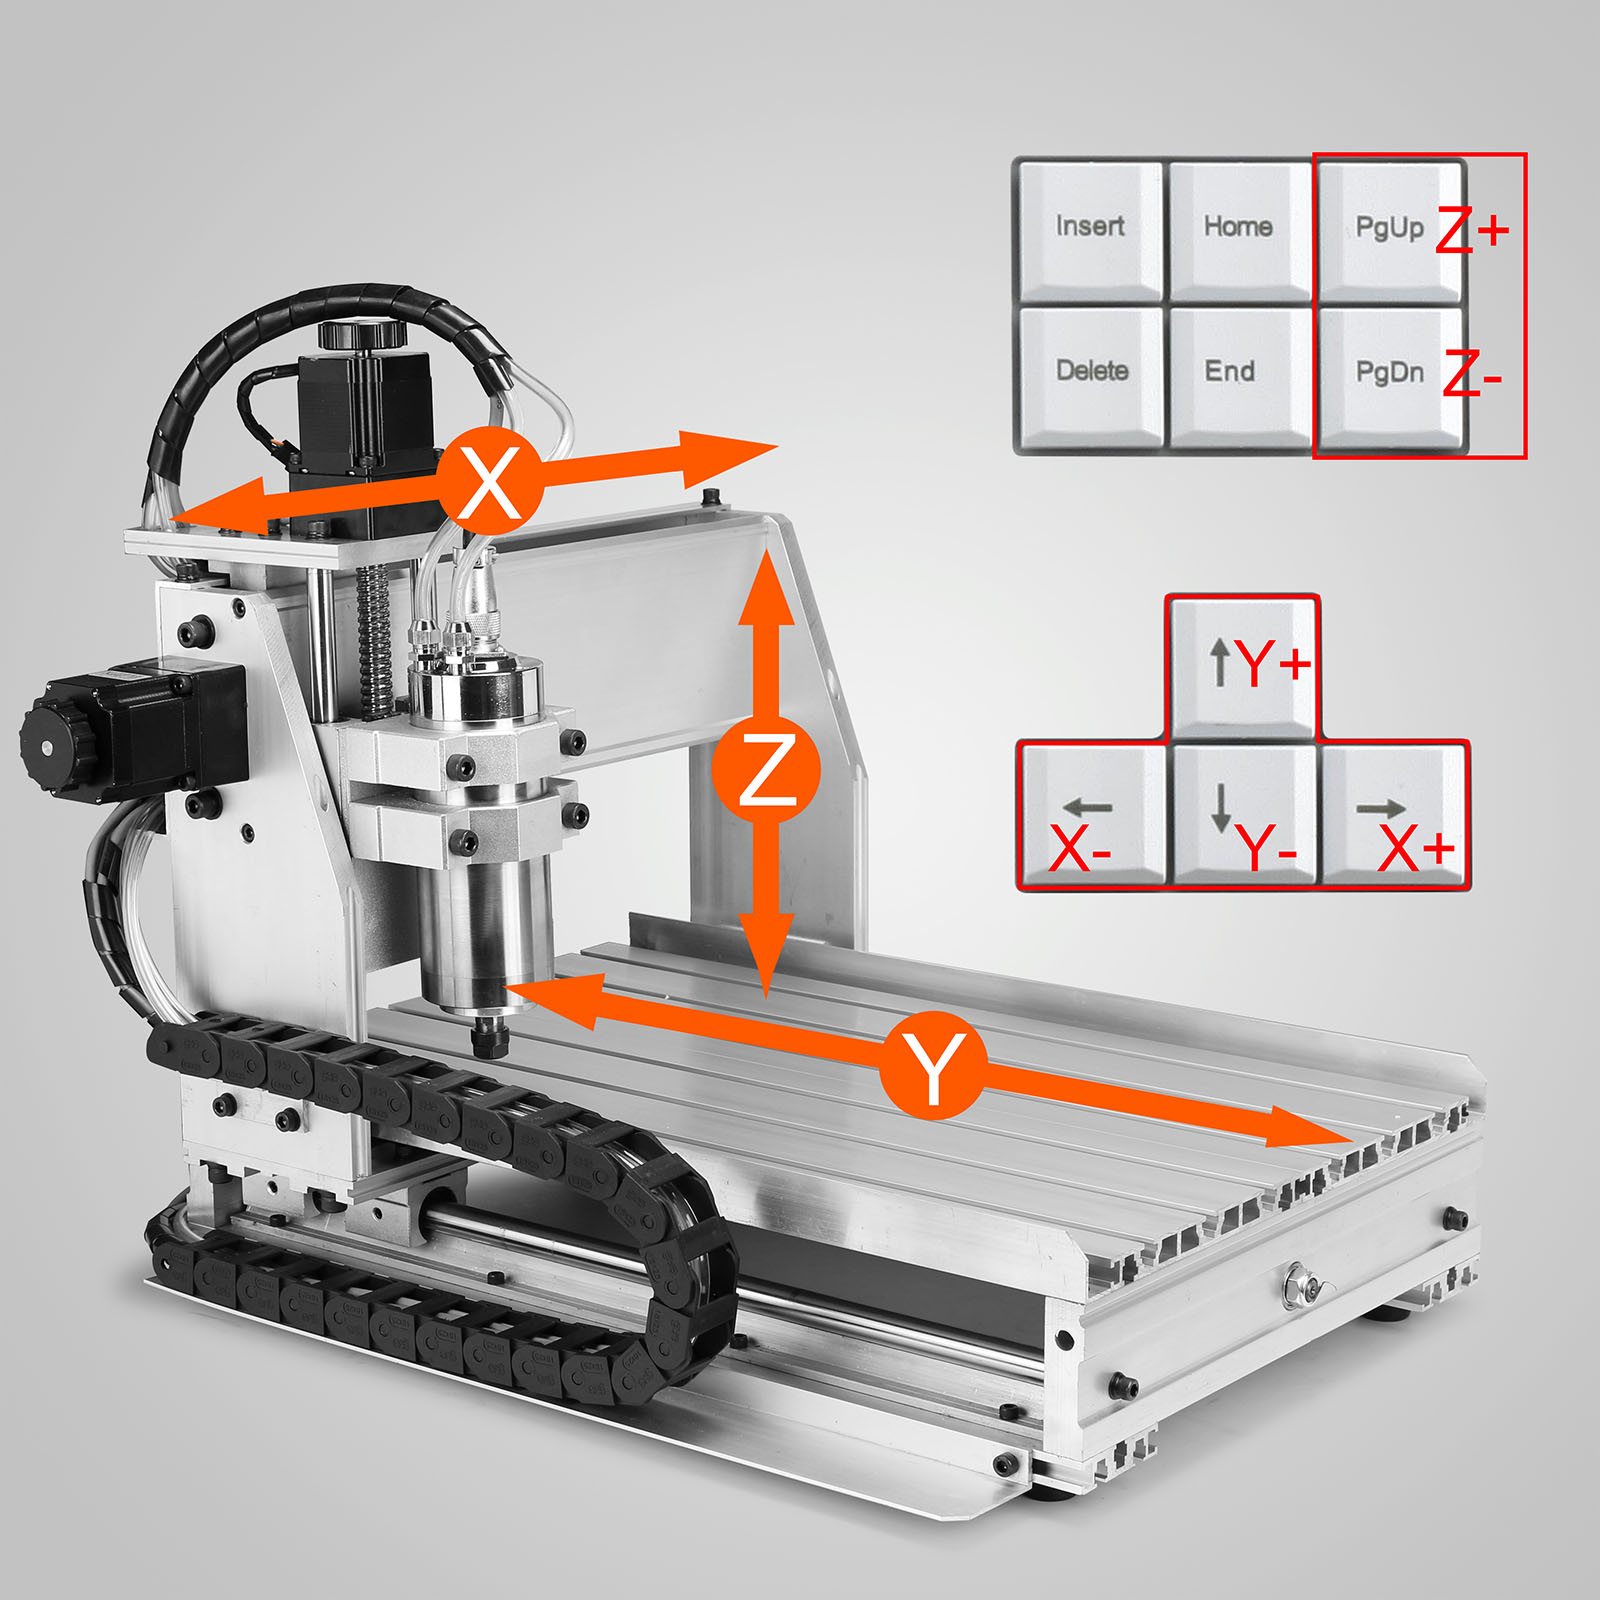 4 Axis Cnc Router Engraver Engraving Machine Drilling Milling 6040z Cutter Tool Ebay